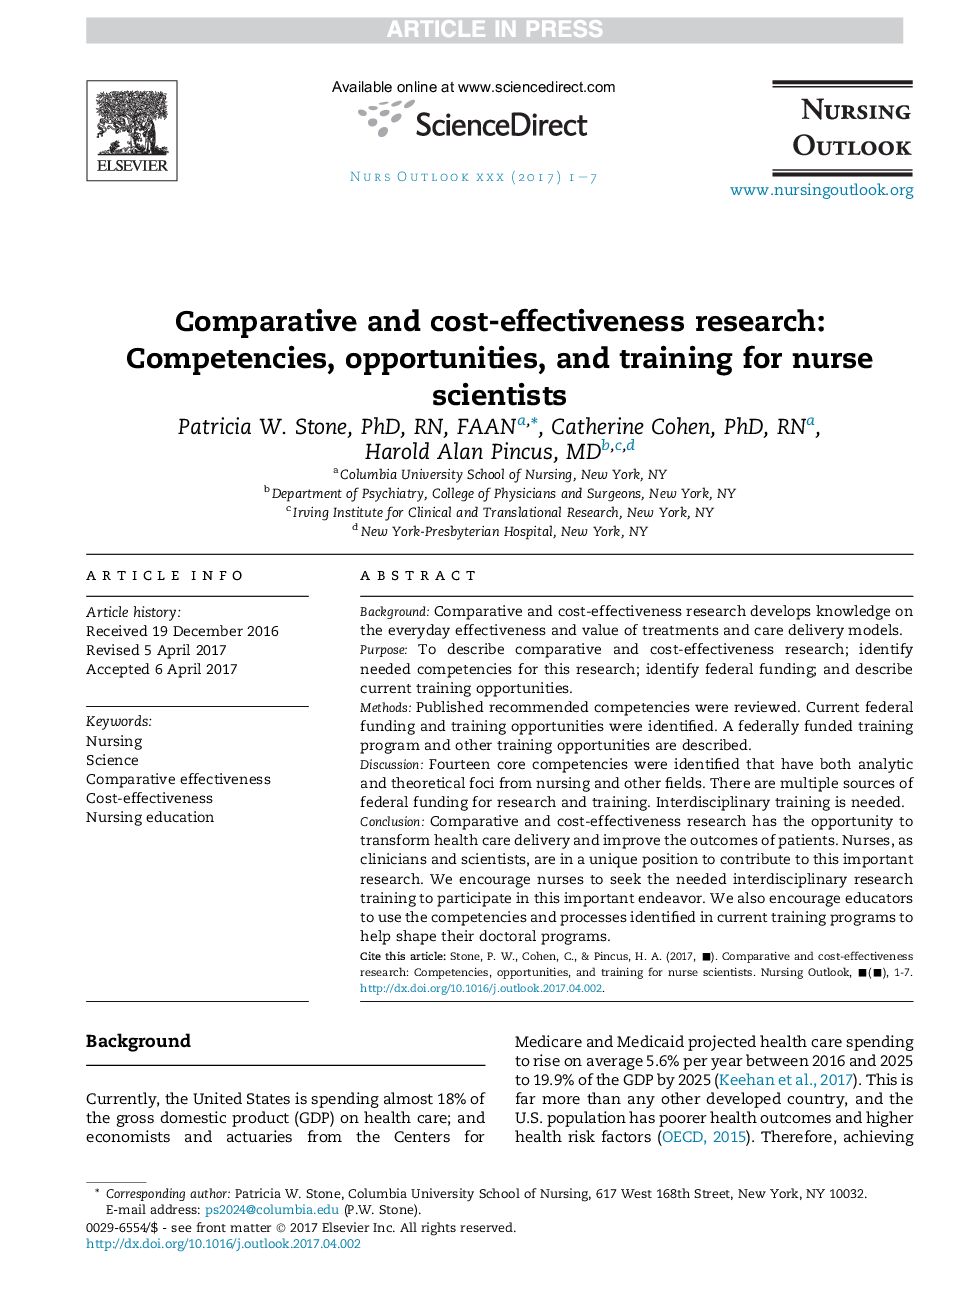 Comparative and cost-effectiveness research: Competencies, opportunities, and training for nurse scientists